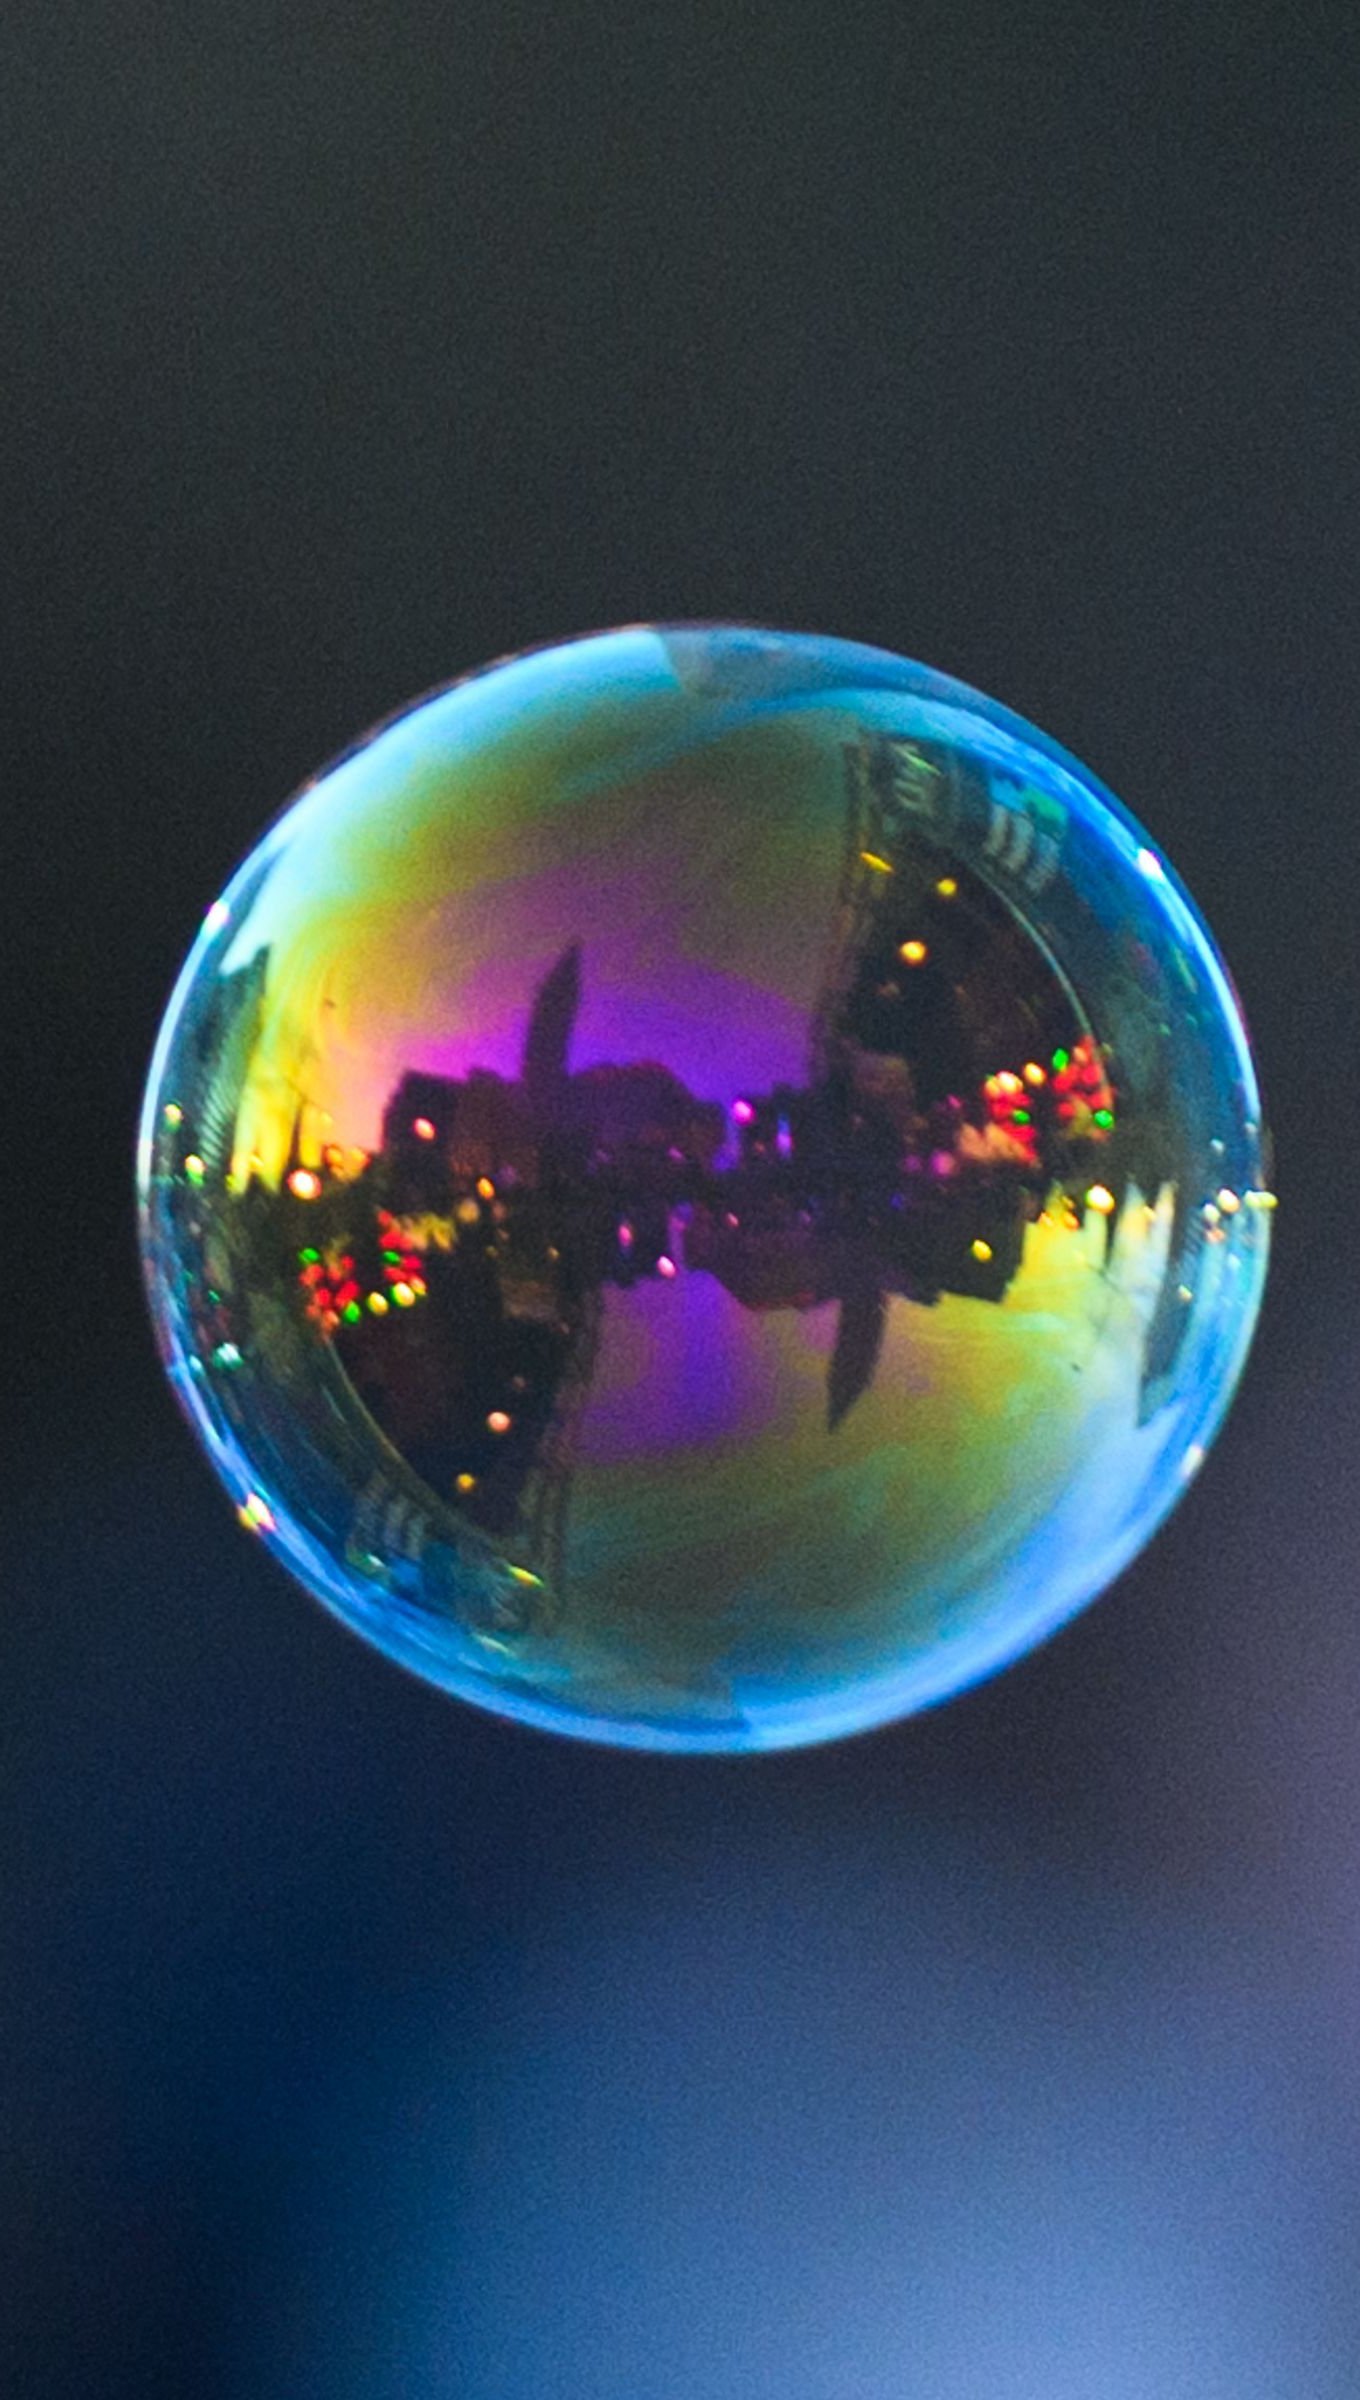 Bubble Photos Download The BEST Free Bubble Stock Photos  HD Images